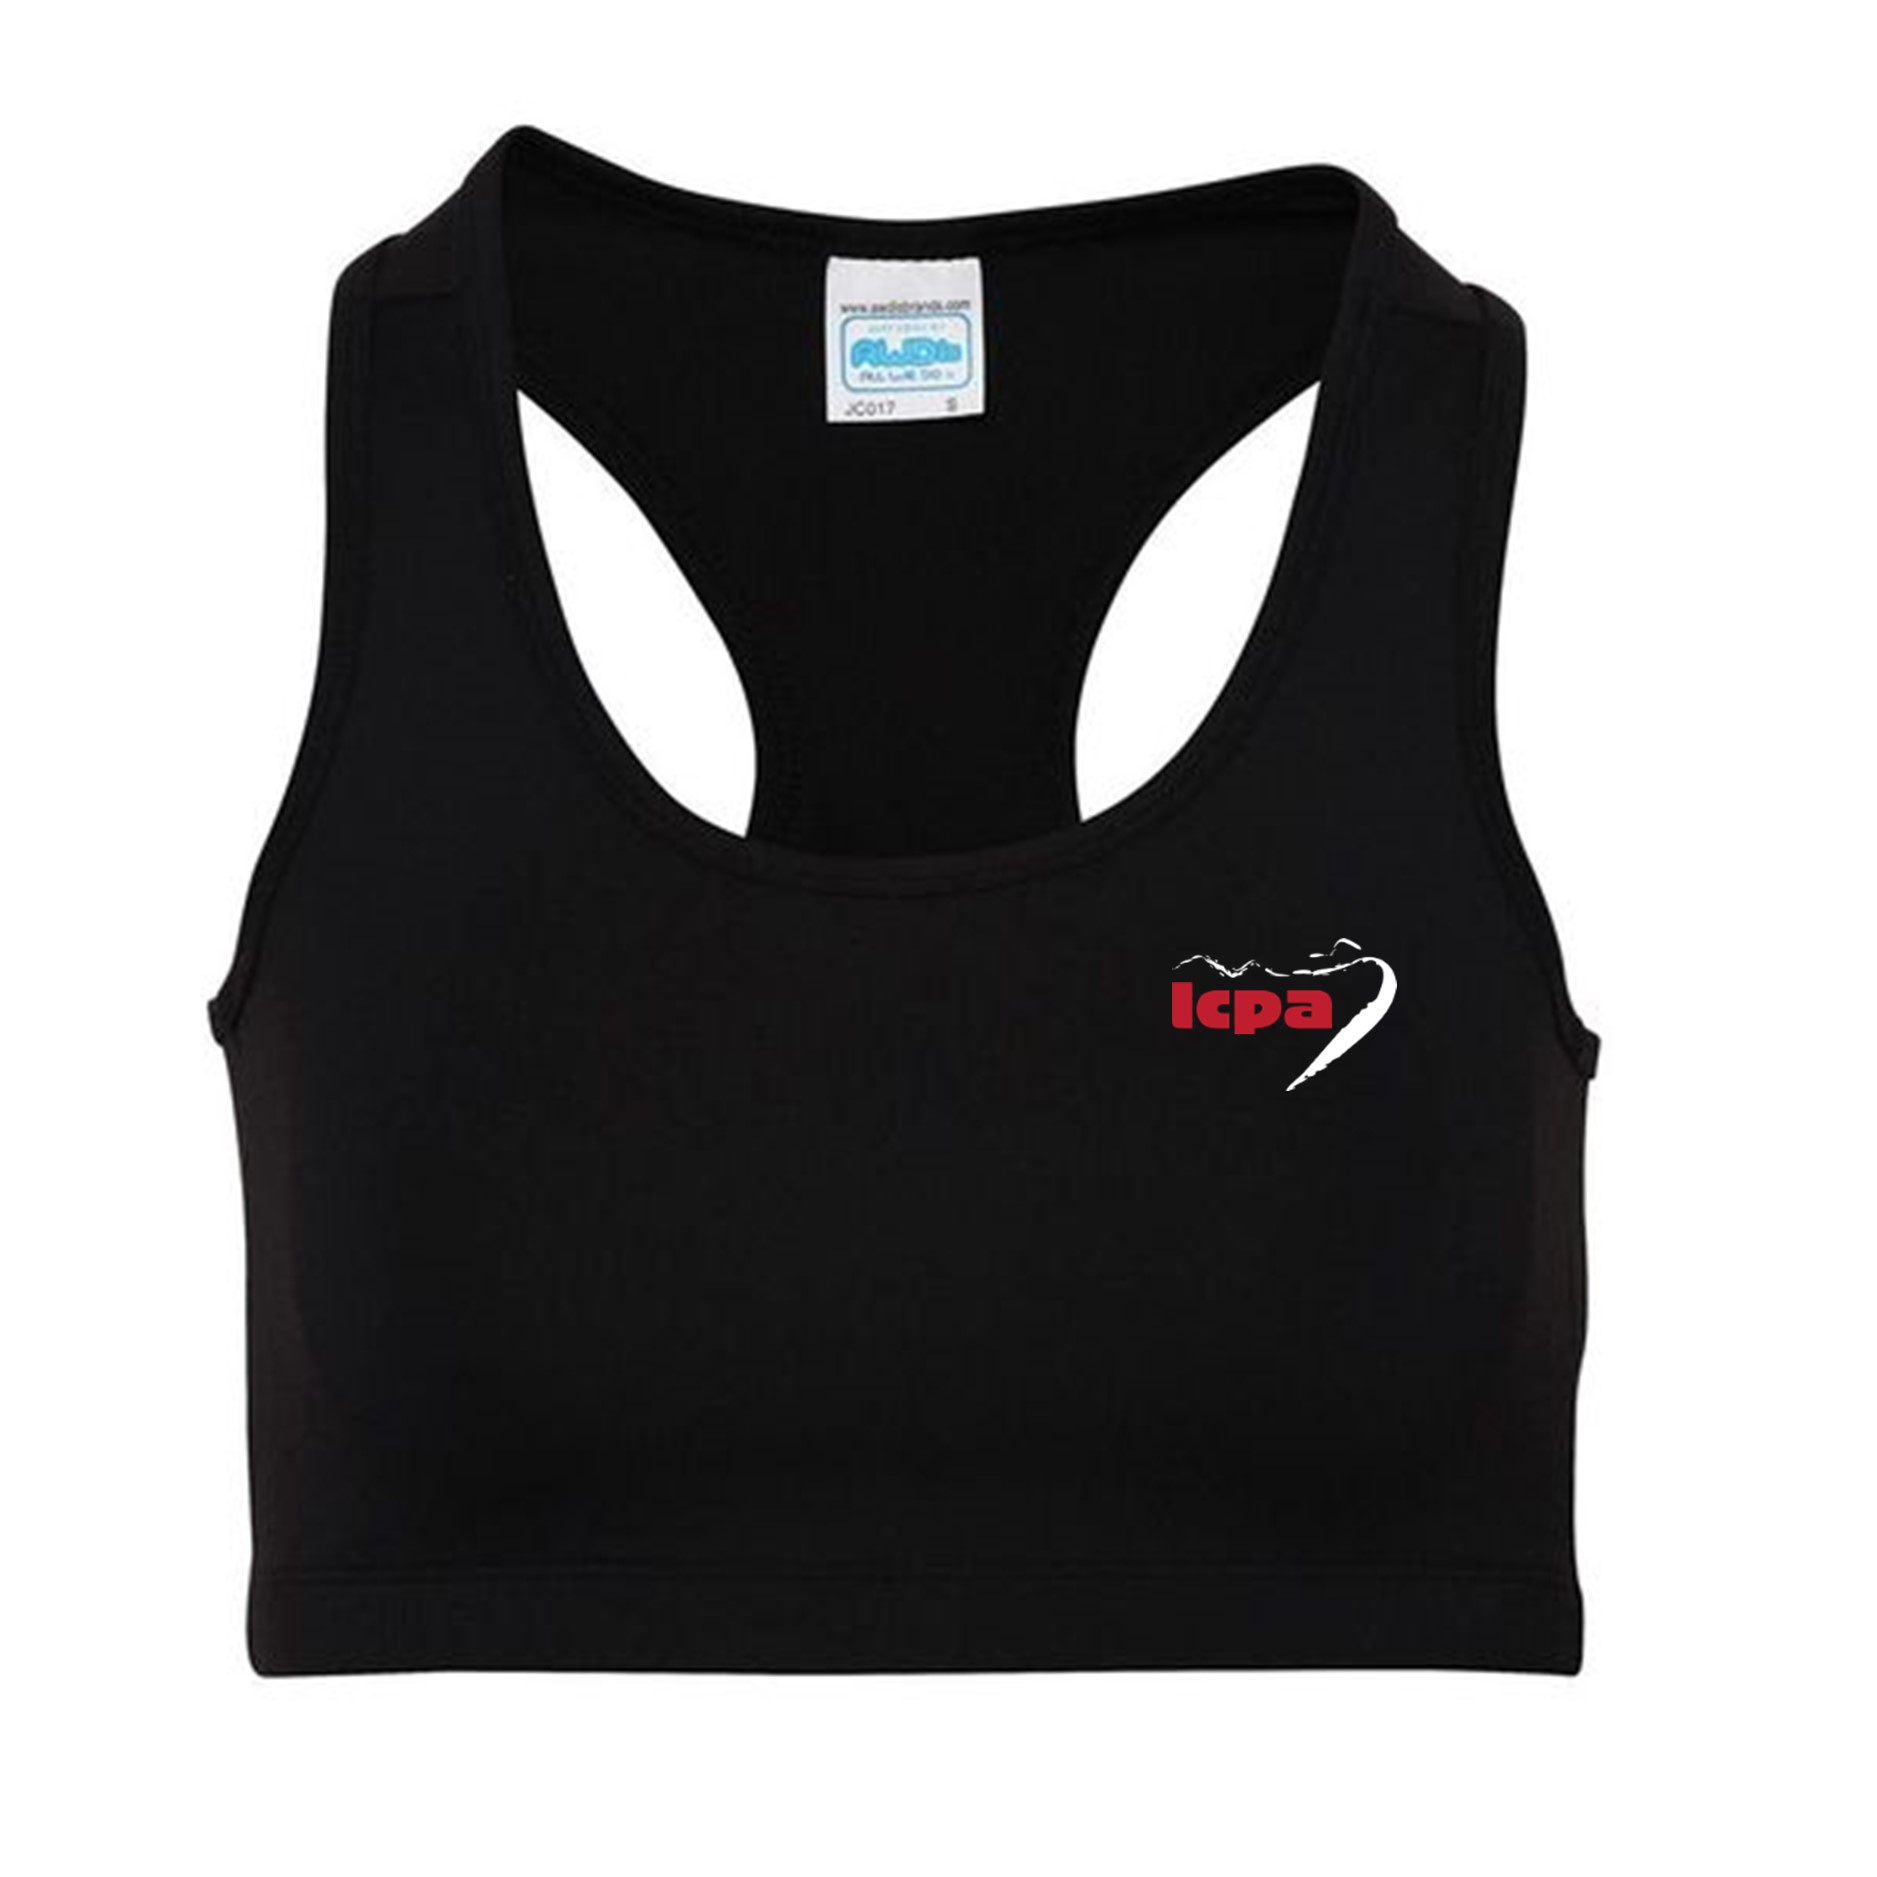 LCPA-009 Girlie cool sports crop top